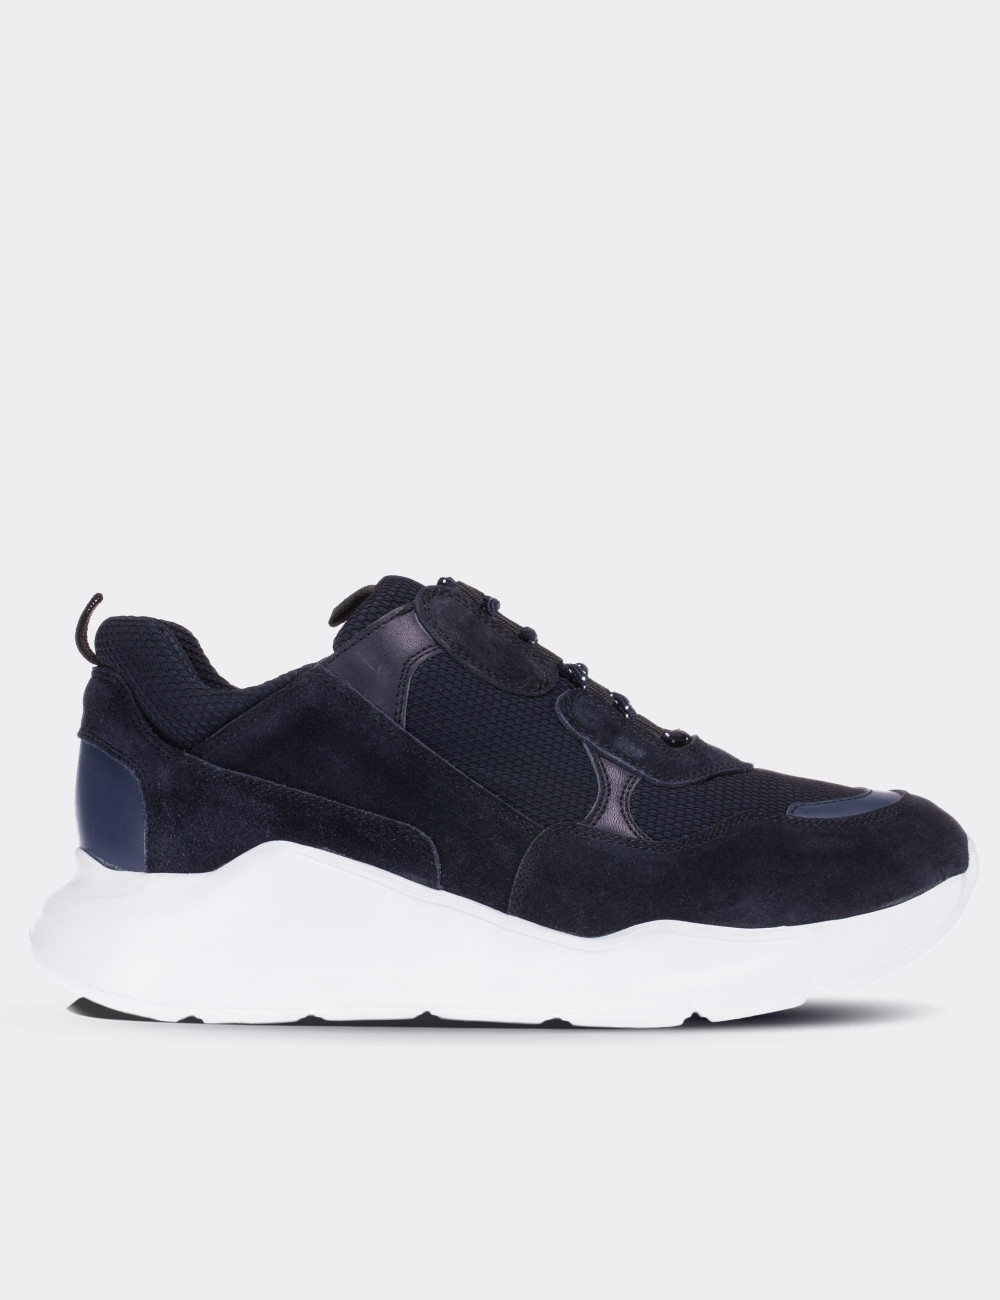 Navy Suede Leather Sneakers - 01724MLCVE01